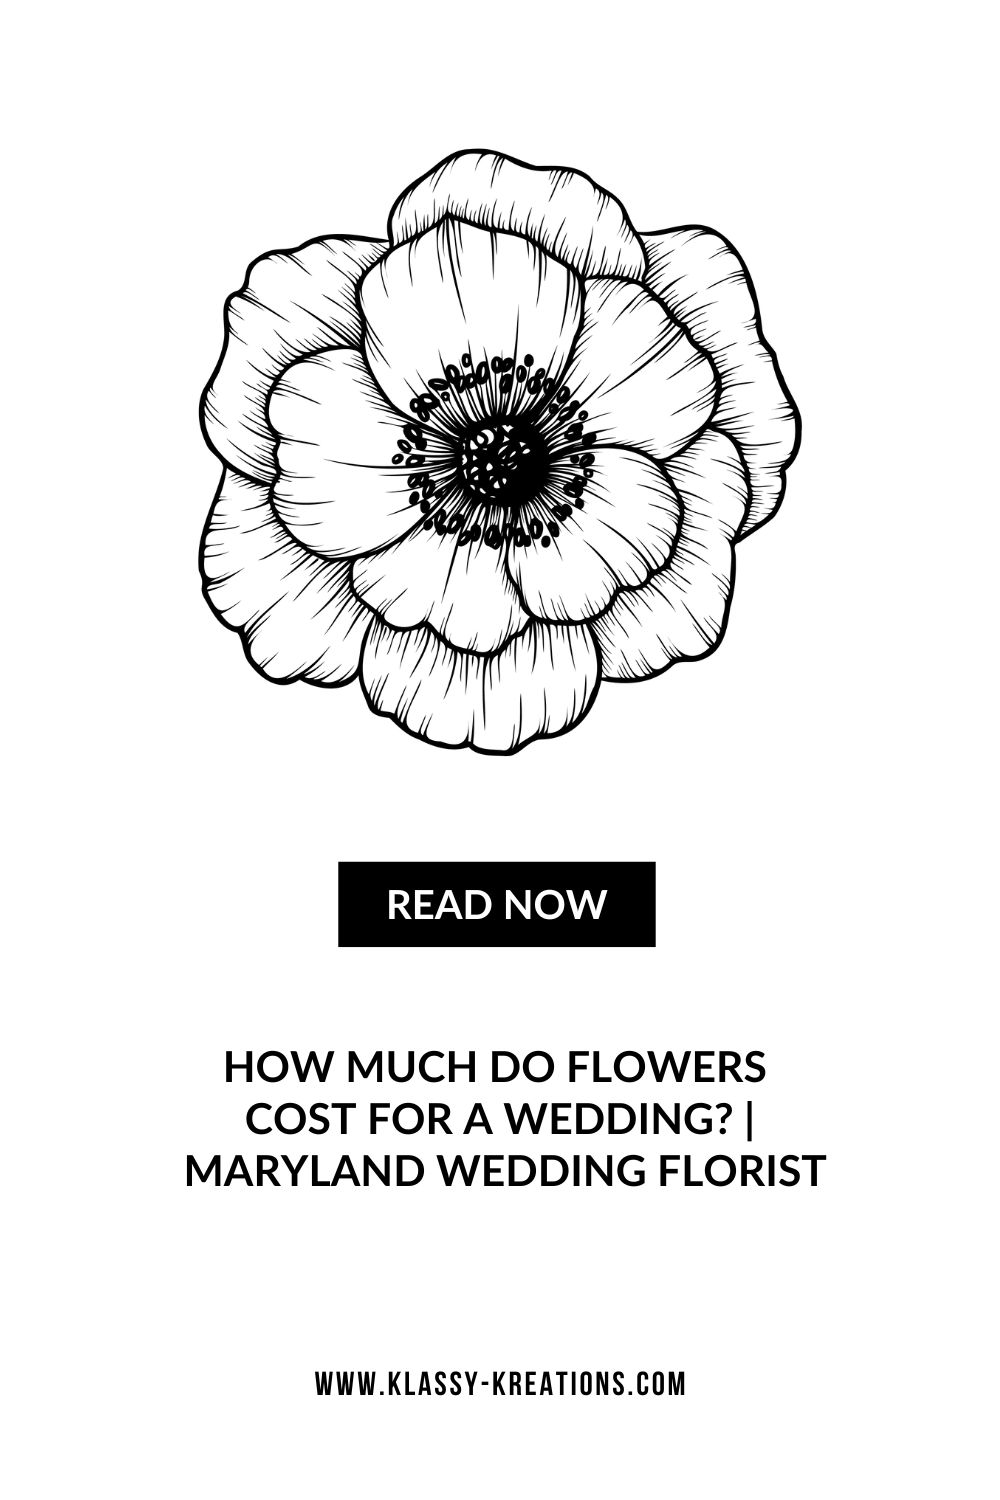 blog-post-How-much-do-flowers-cost-for-a-wedding-maryland-wedding-florist